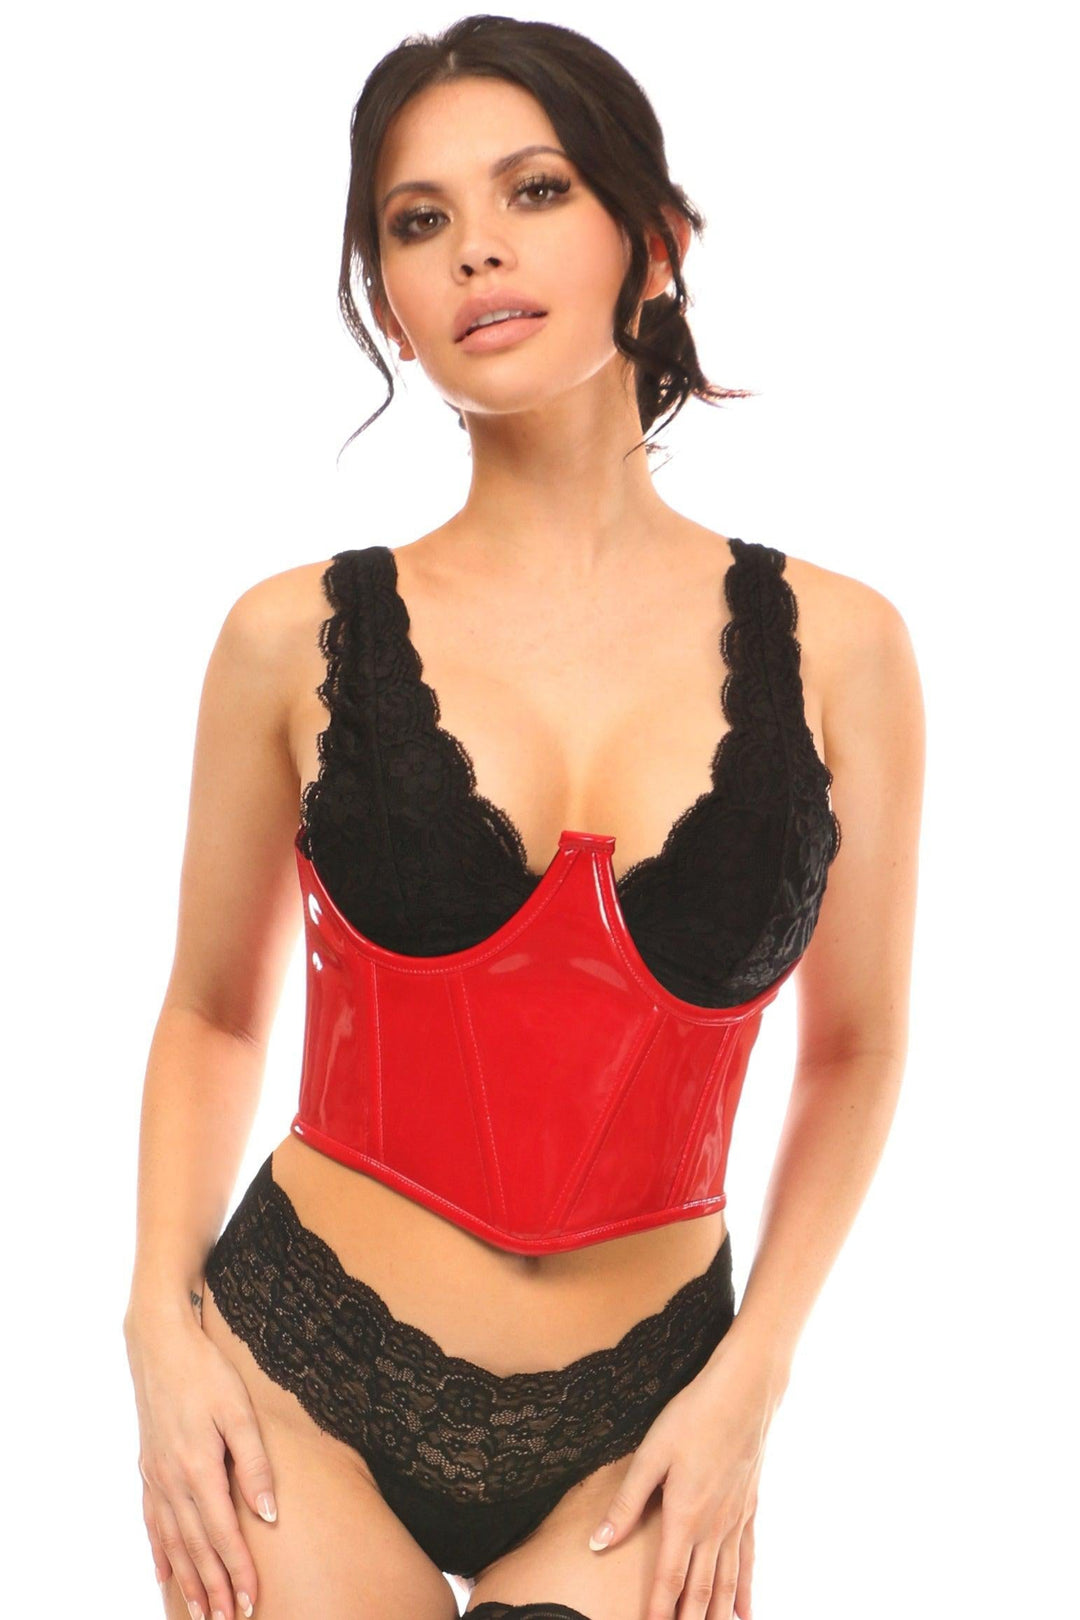 Lavish Red Patent Open Cup Underwire Waist Cincher-Waist Cincher-Daisy Corsets-Red-2X-SEXYSHOES.COM